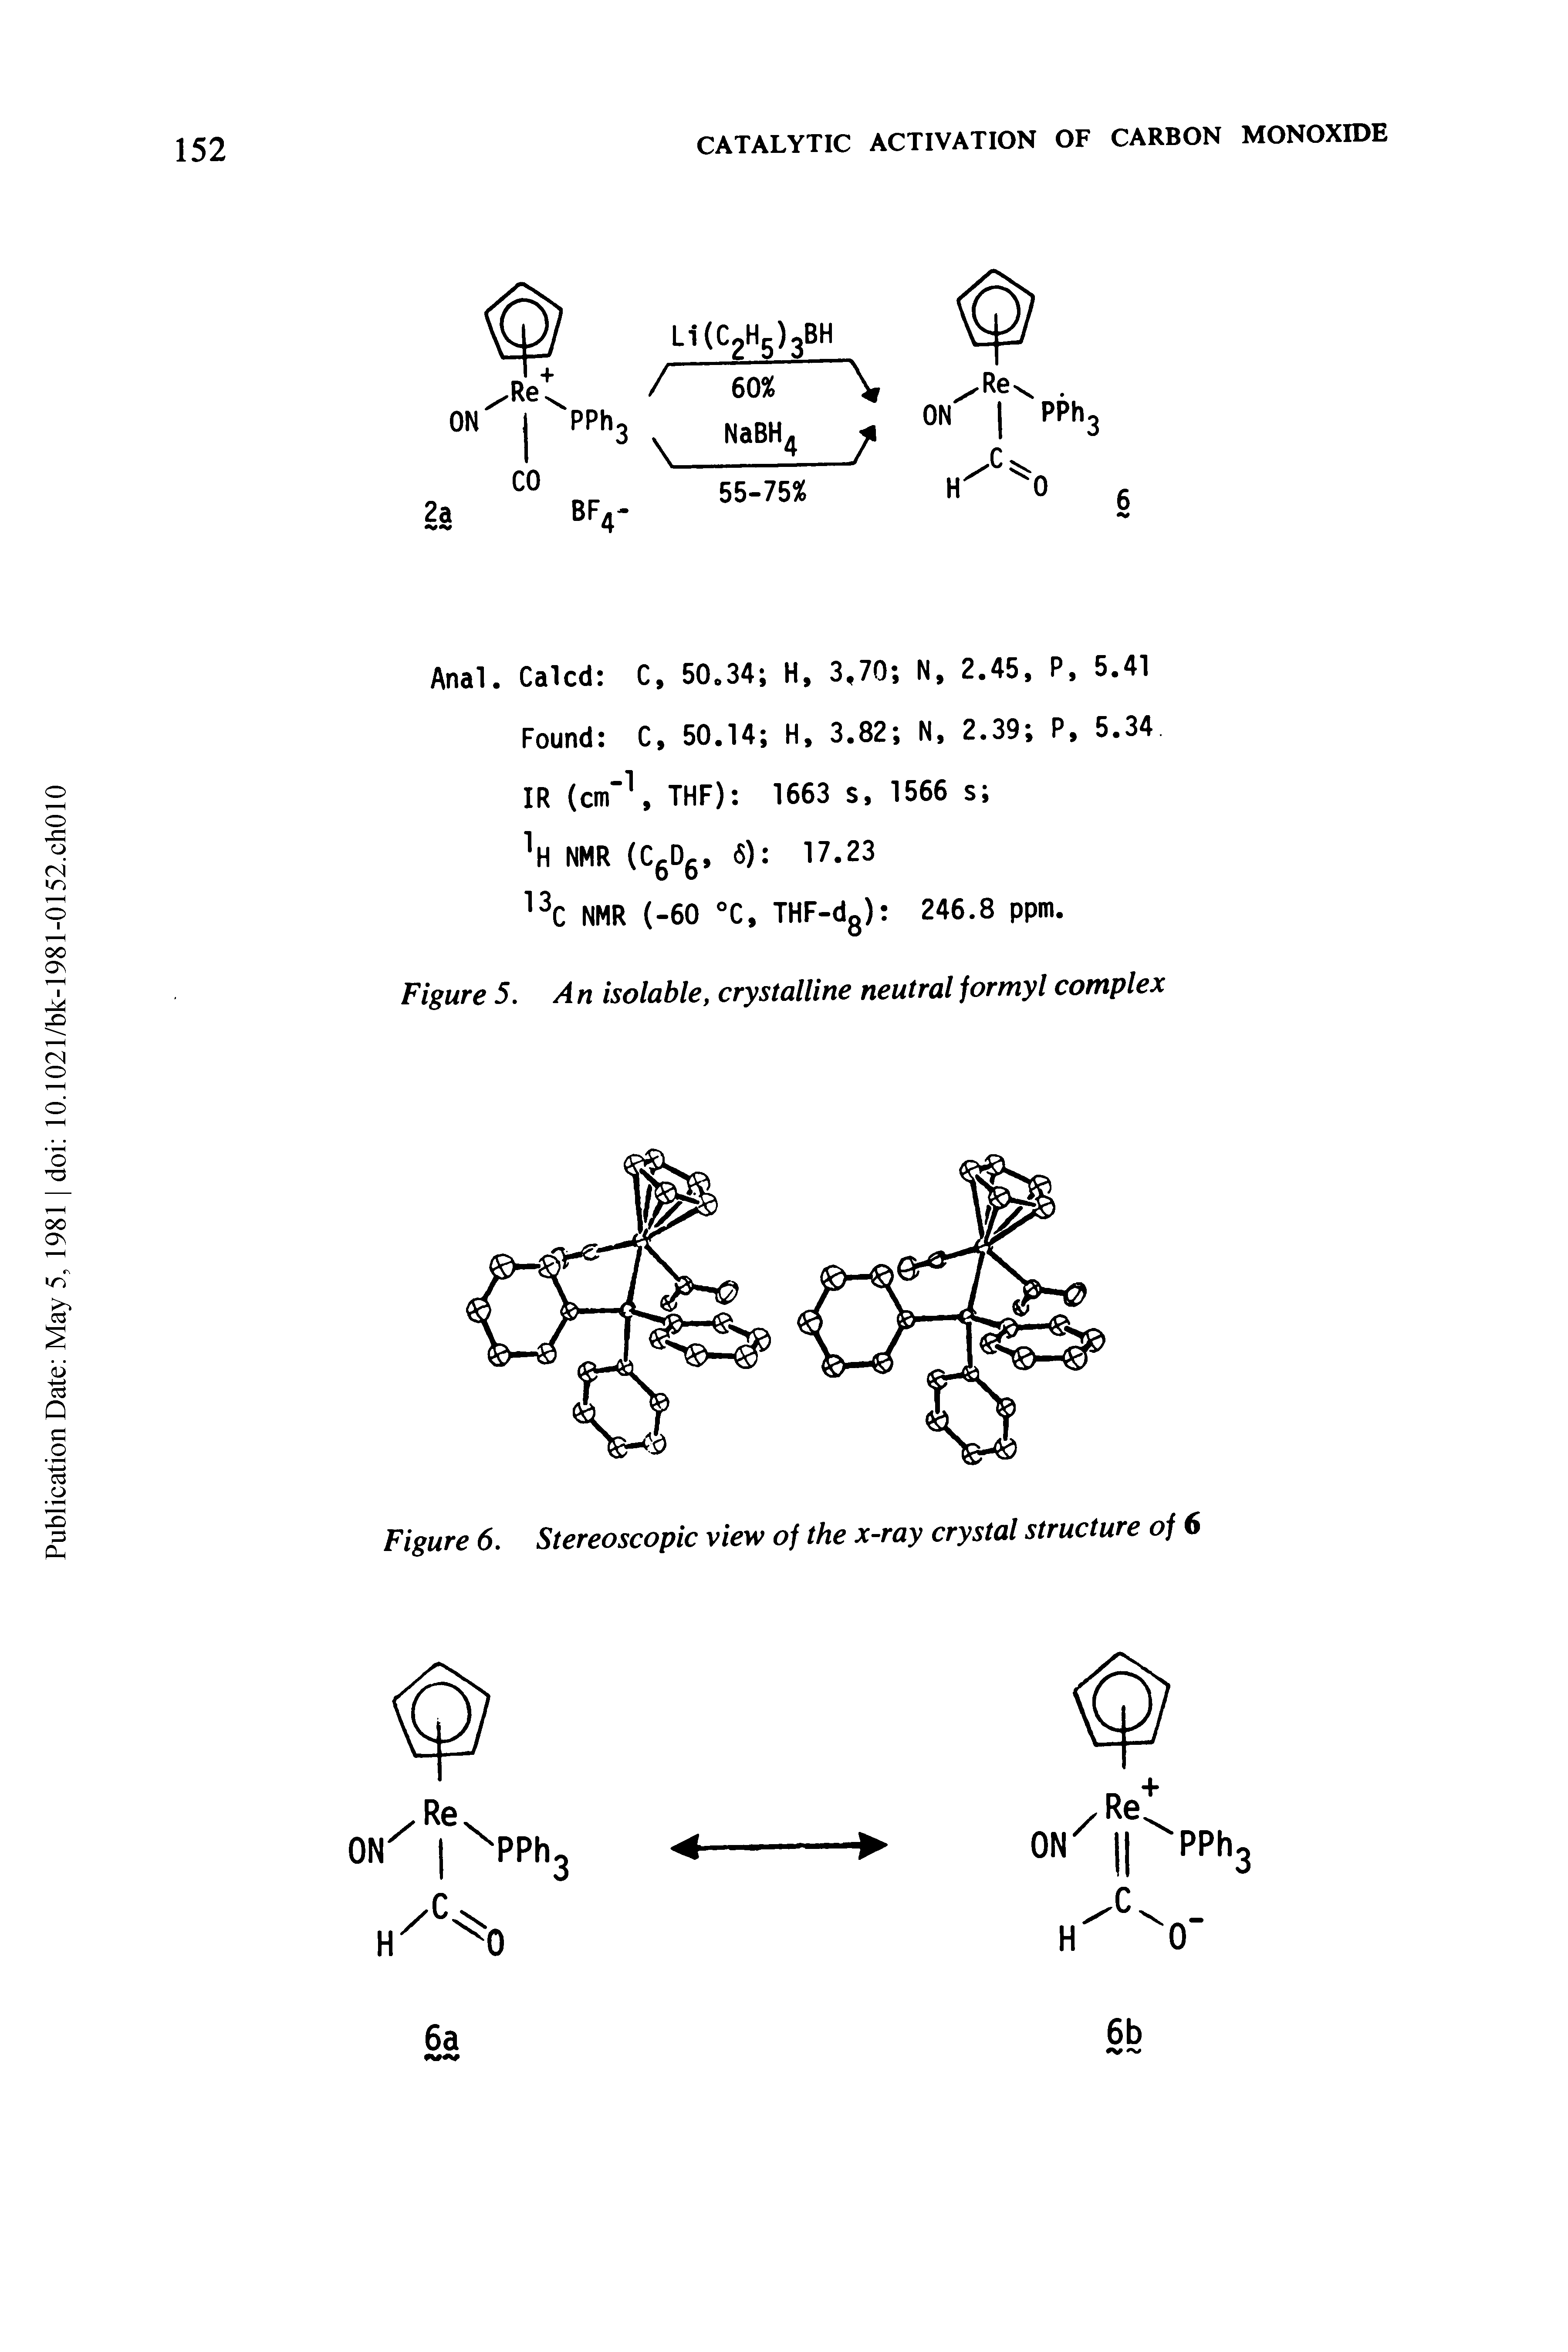 Figure 5. An isolable, crystalline neutral formyl complex...